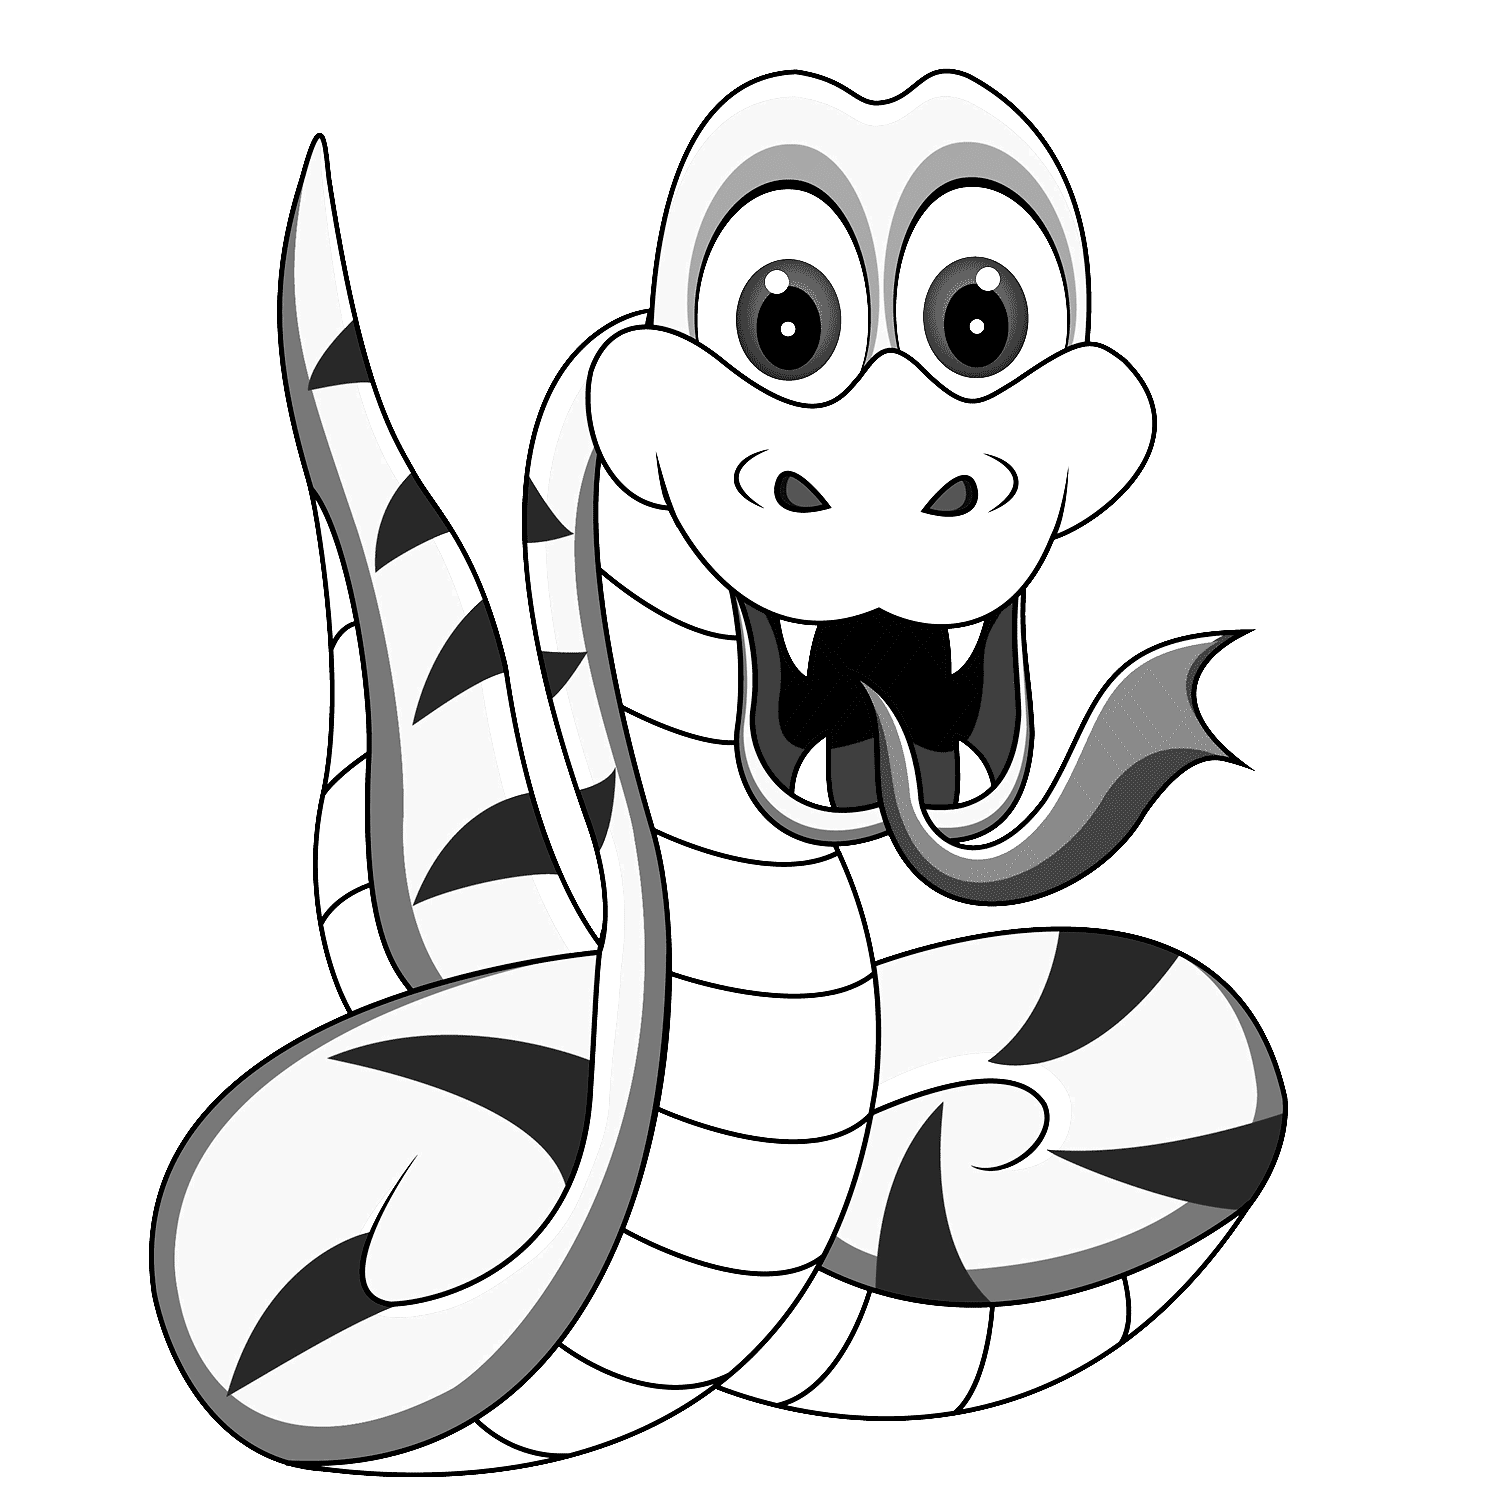 172 Animal Printable Coloring Pages Of Snakes for Adult